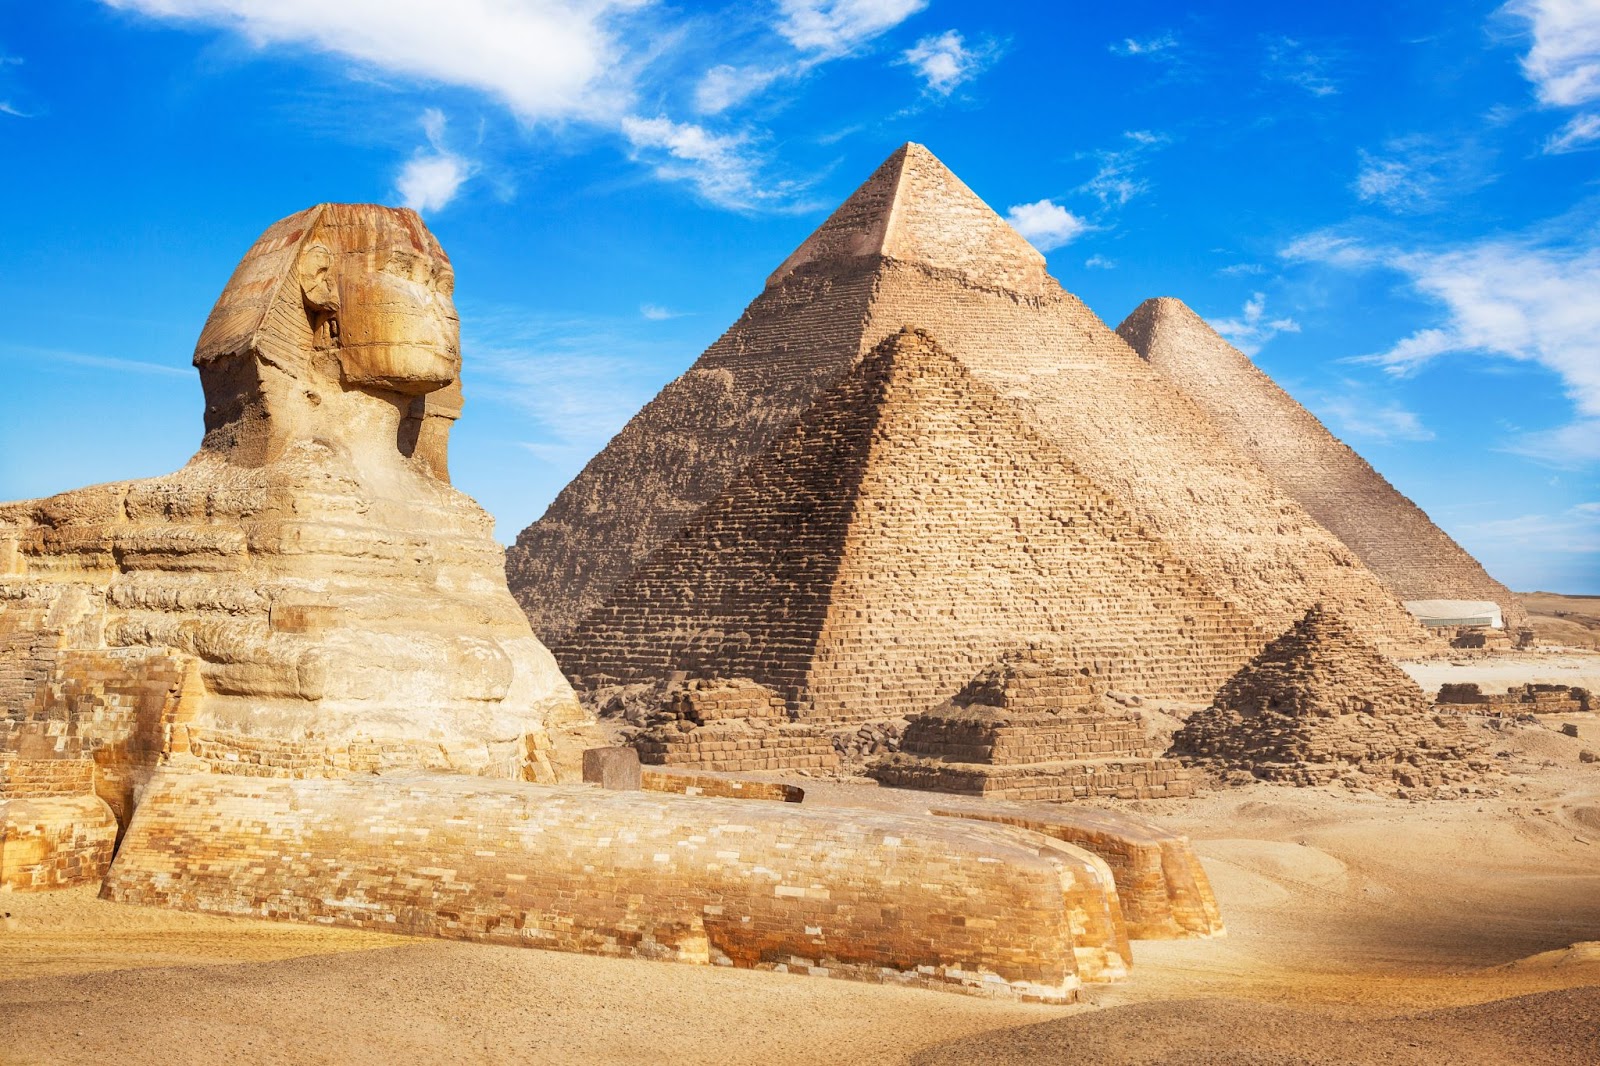 The Pyramids of Giza, Egypt - 23 Top Sights to See Before You Die